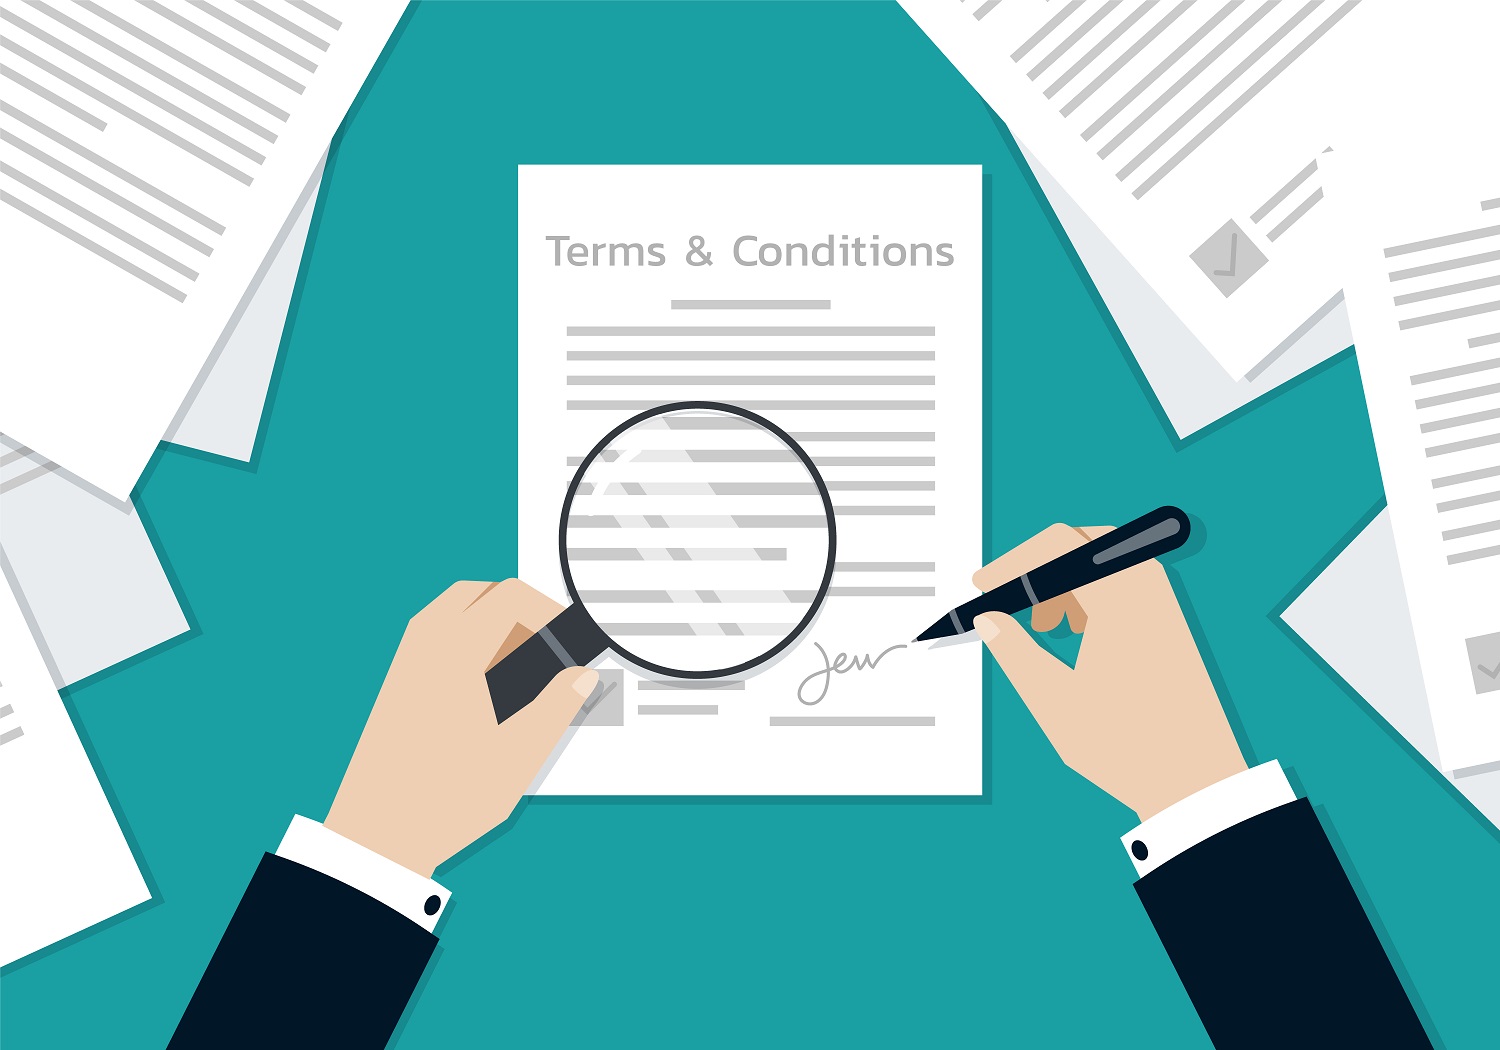 saas-agreement-terms-and-conditions.jpg